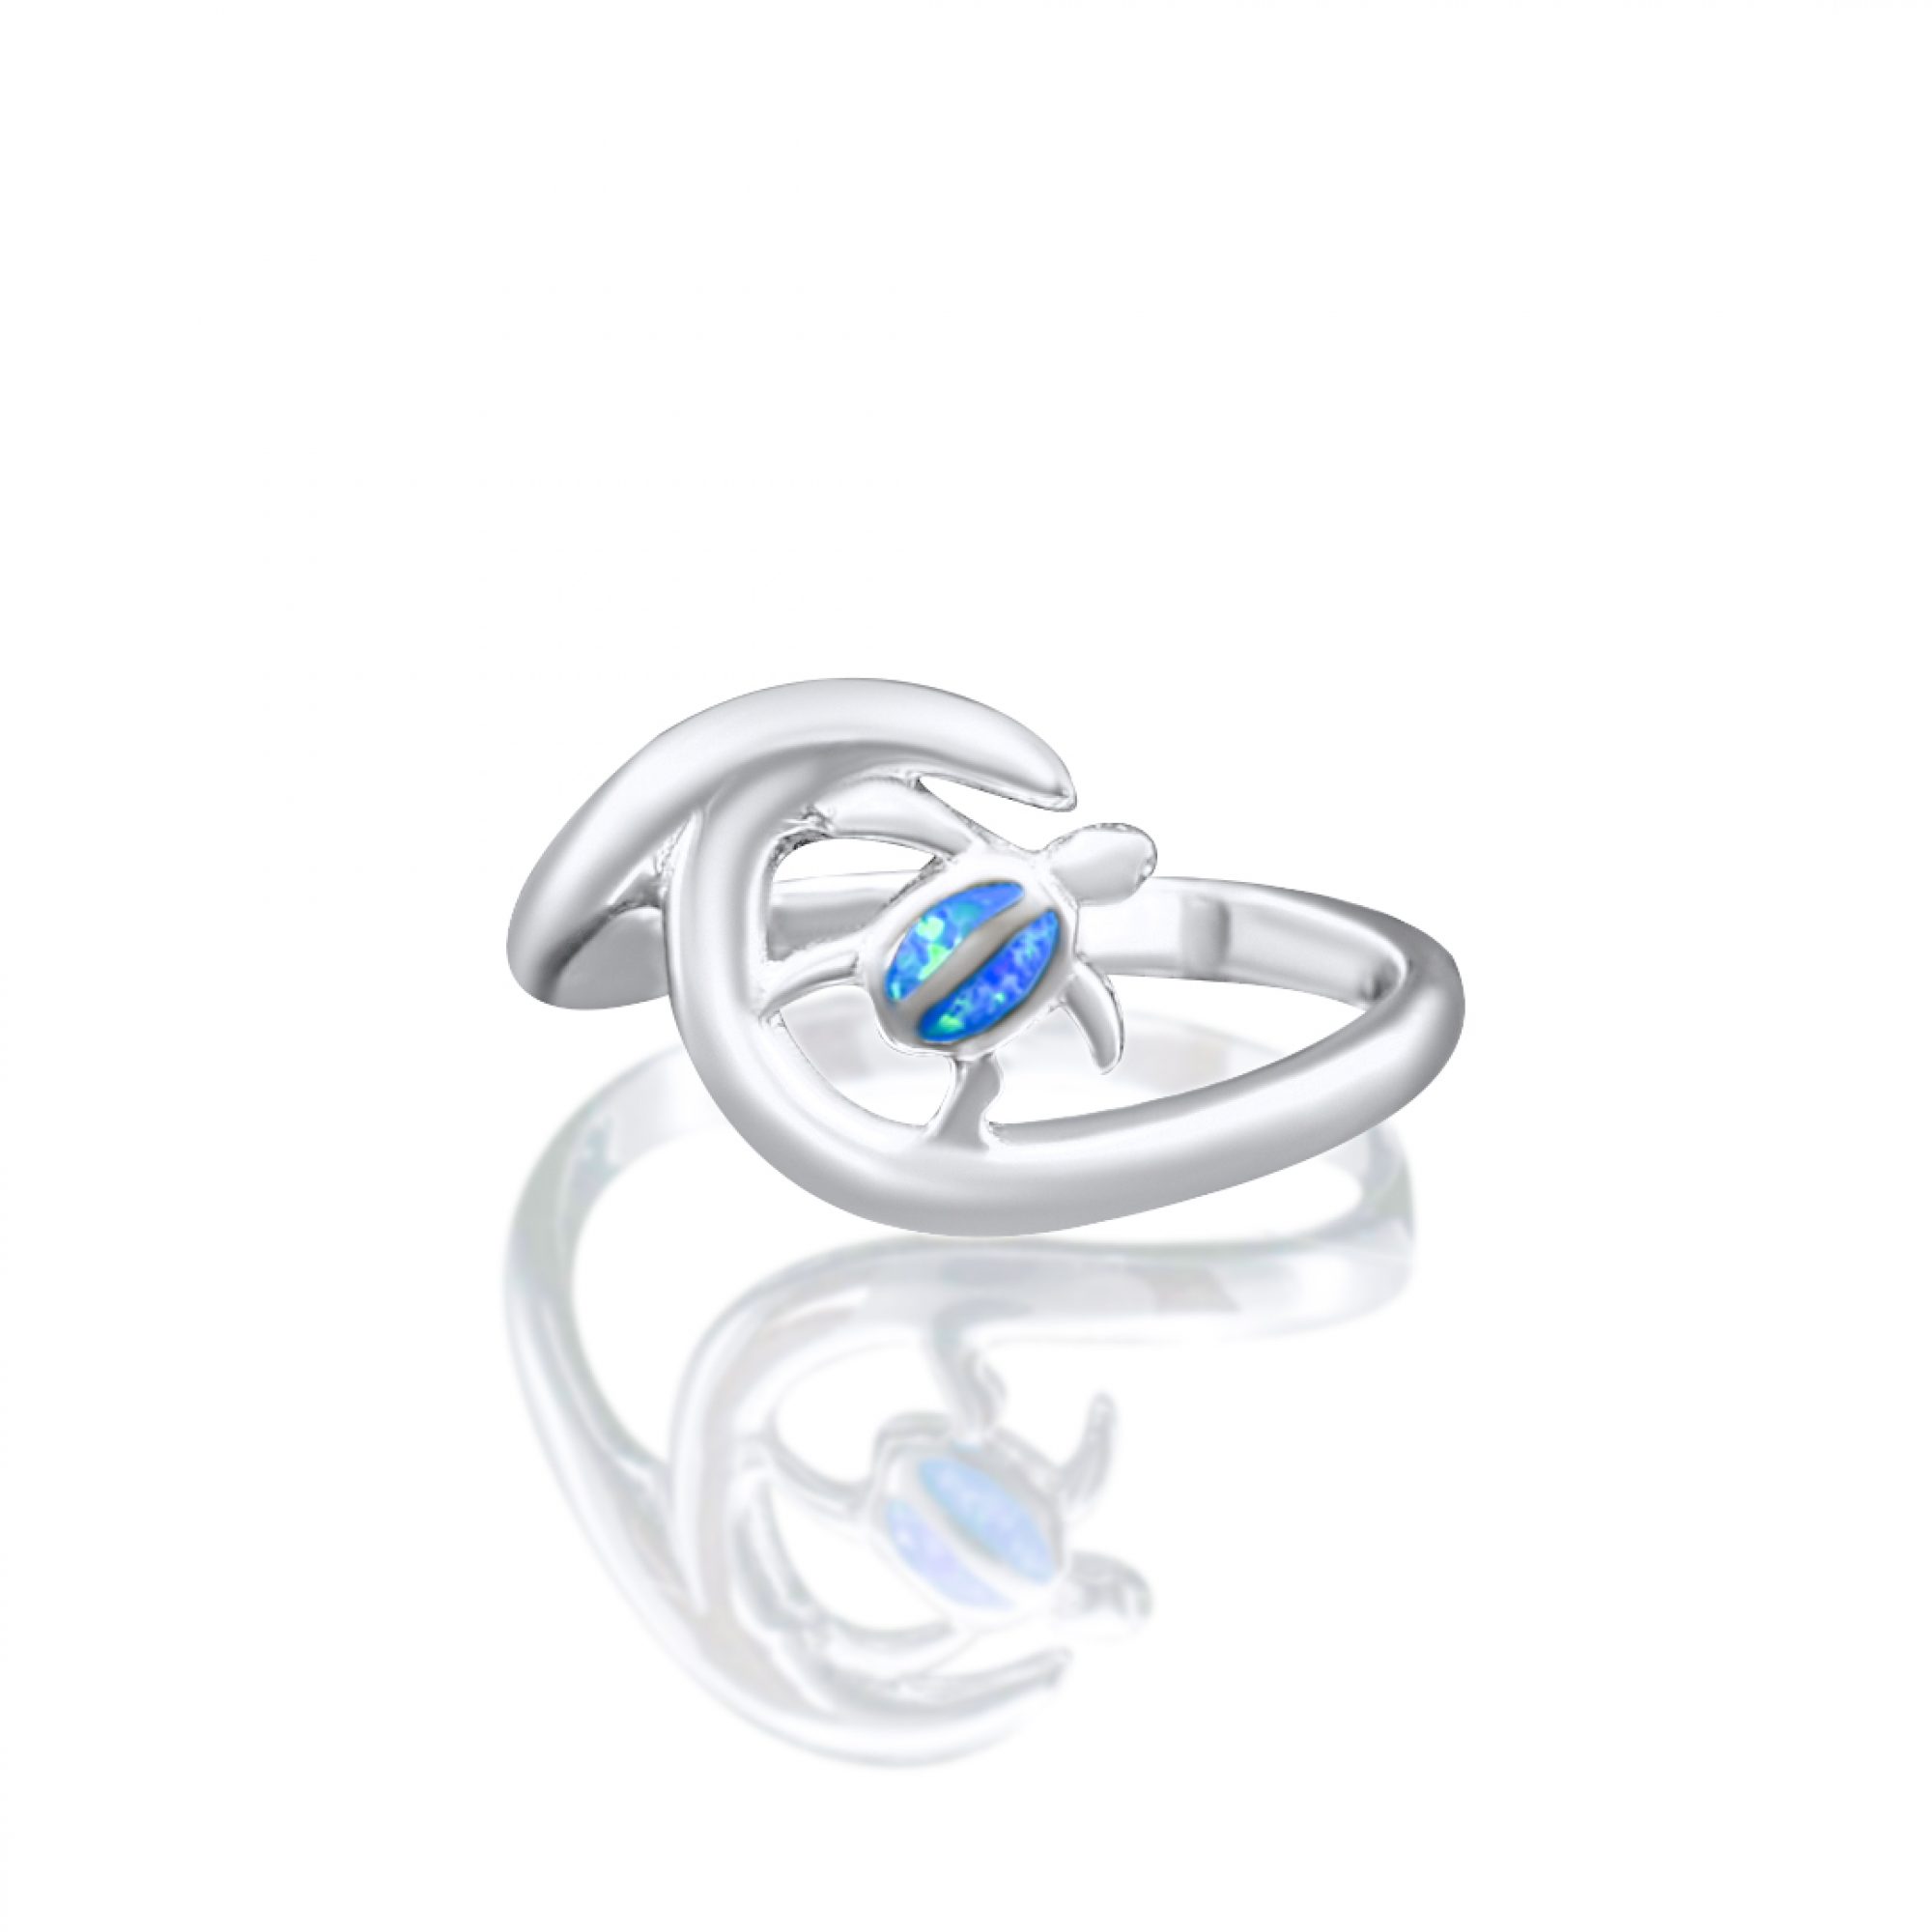 Silver turtle ring with opal stones